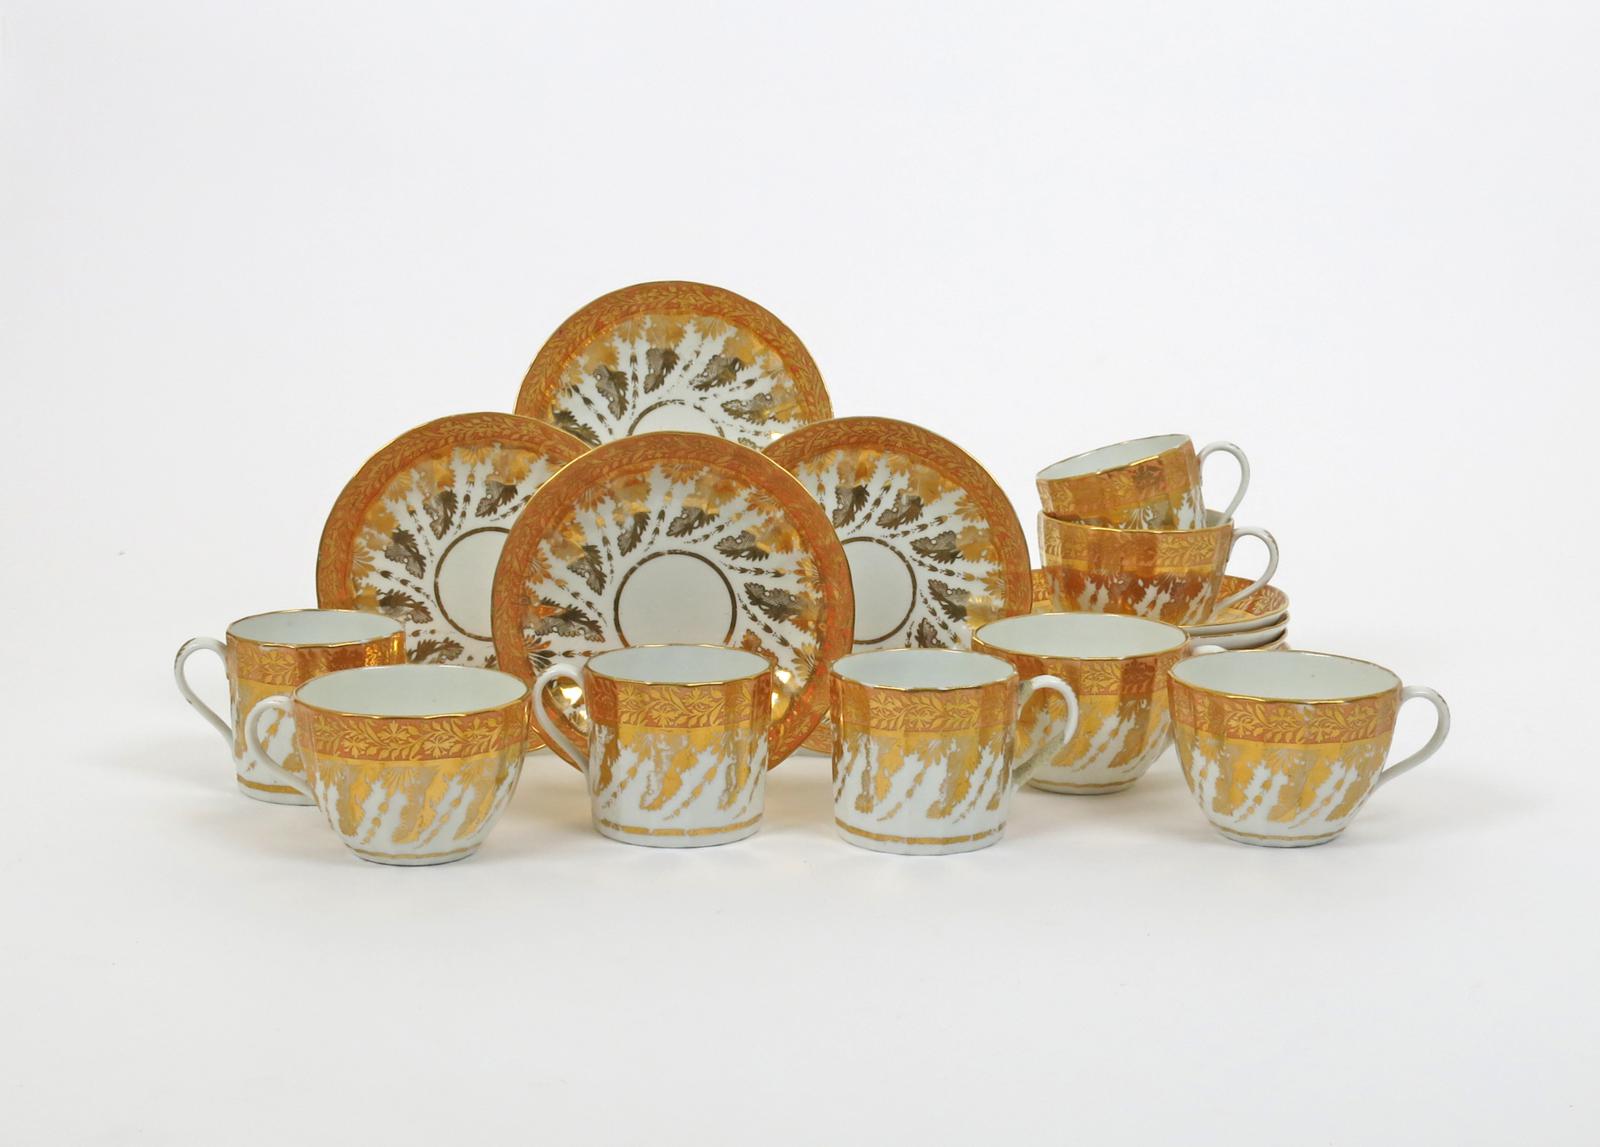 An English porcelain part tea service  early 19th century, the fluted forms decorated with formal